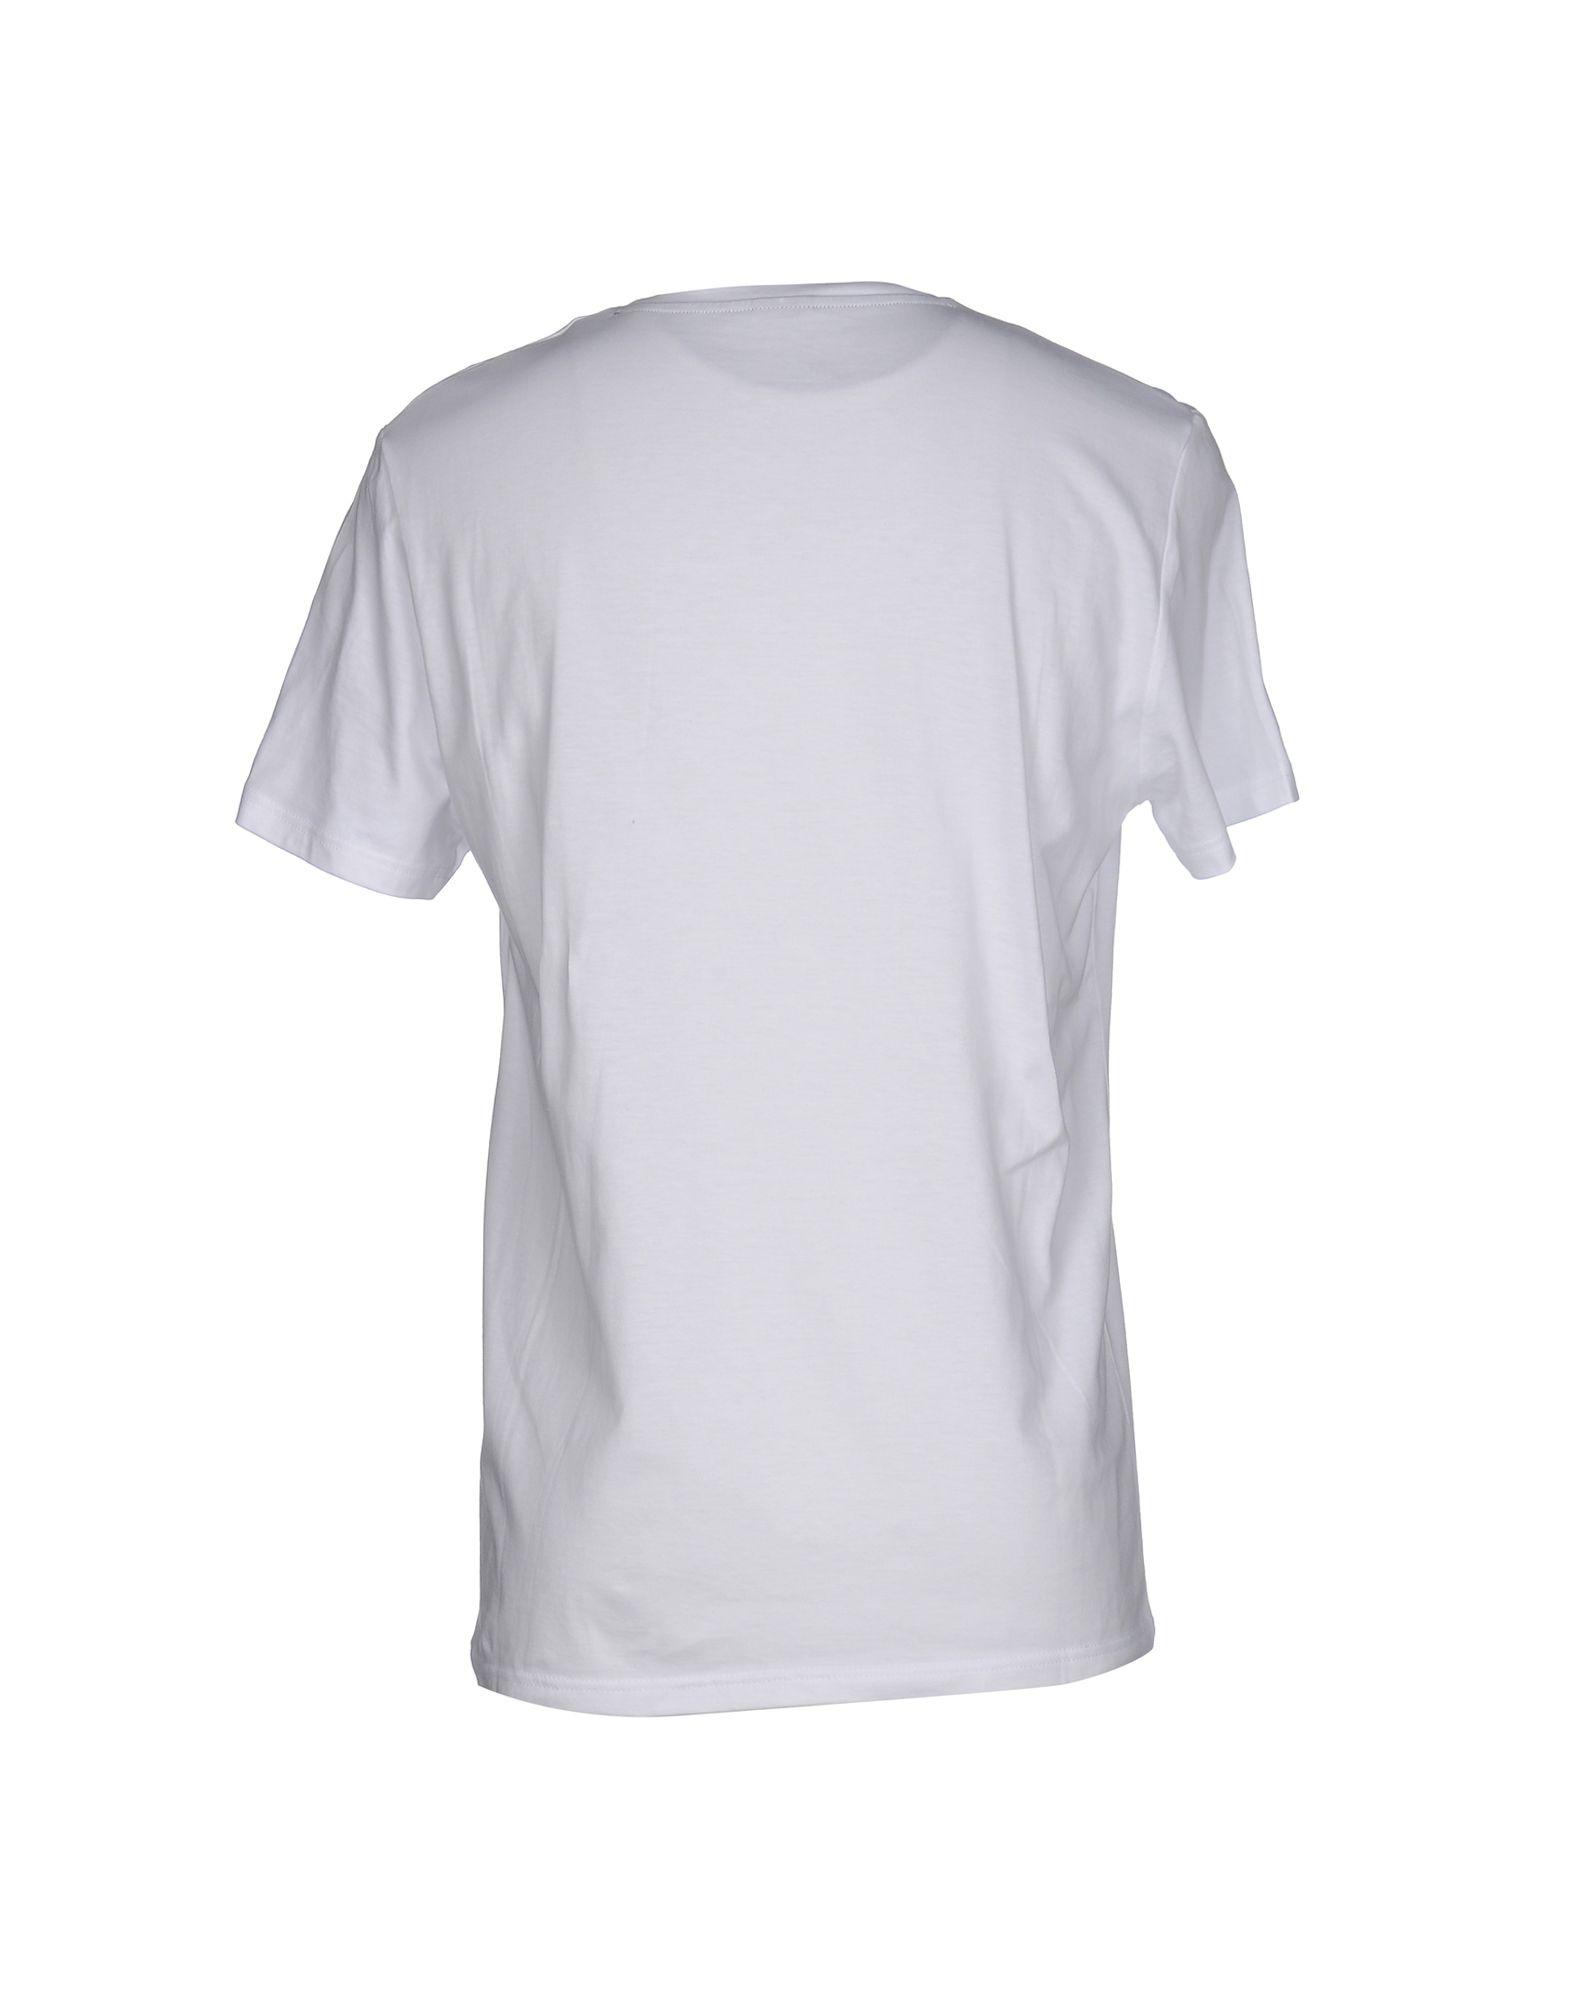 Lyst - Marina Yachting T-shirt in White for Men